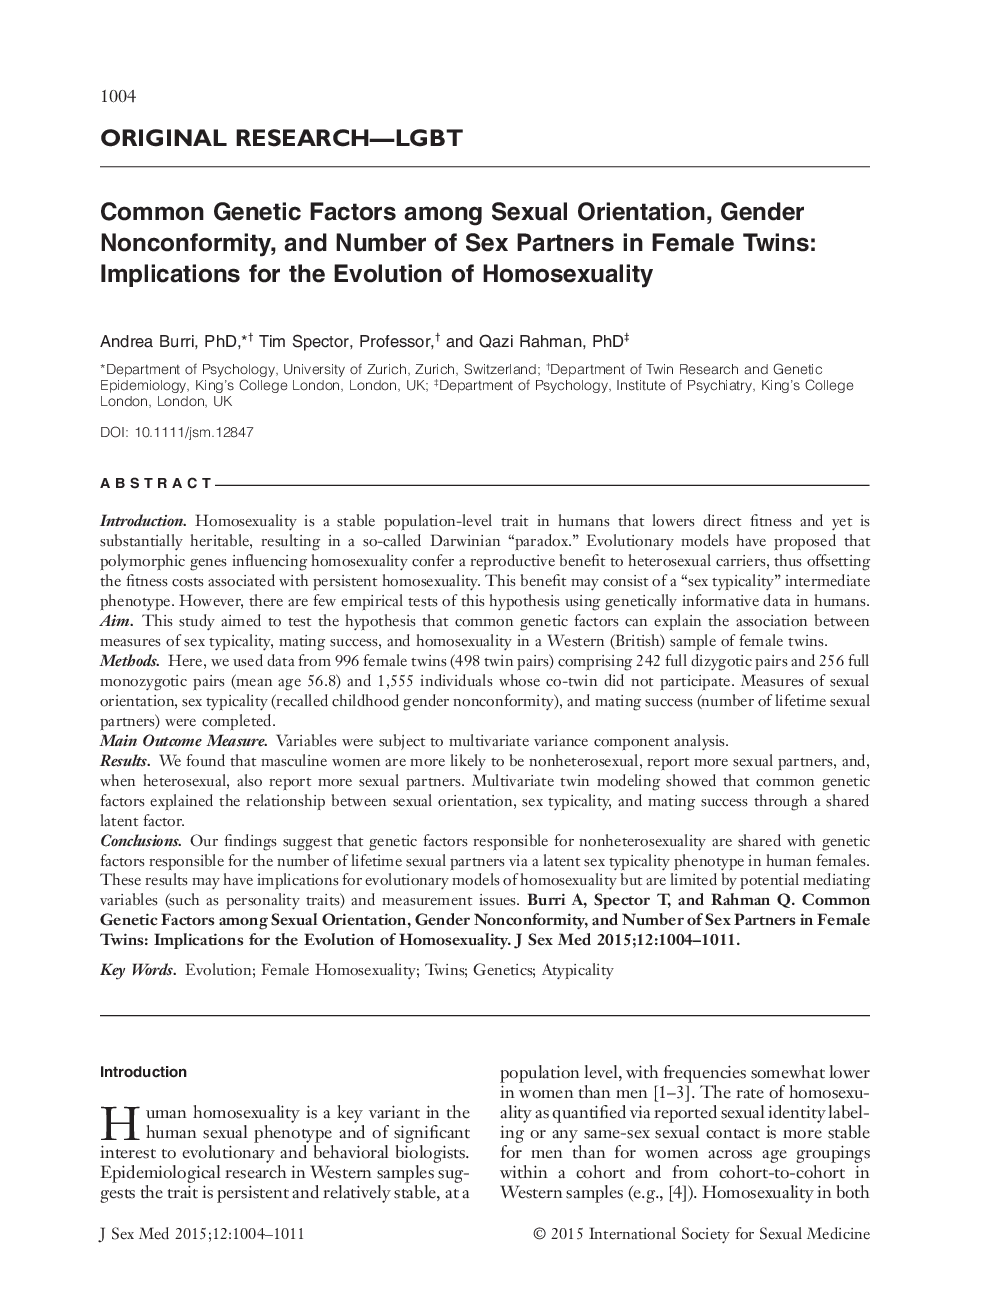 Common Genetic Factors among Sexual Orientation, Gender Nonconformity, and Number of Sex Partners in Female Twins: Implications for the Evolution of Homosexuality 